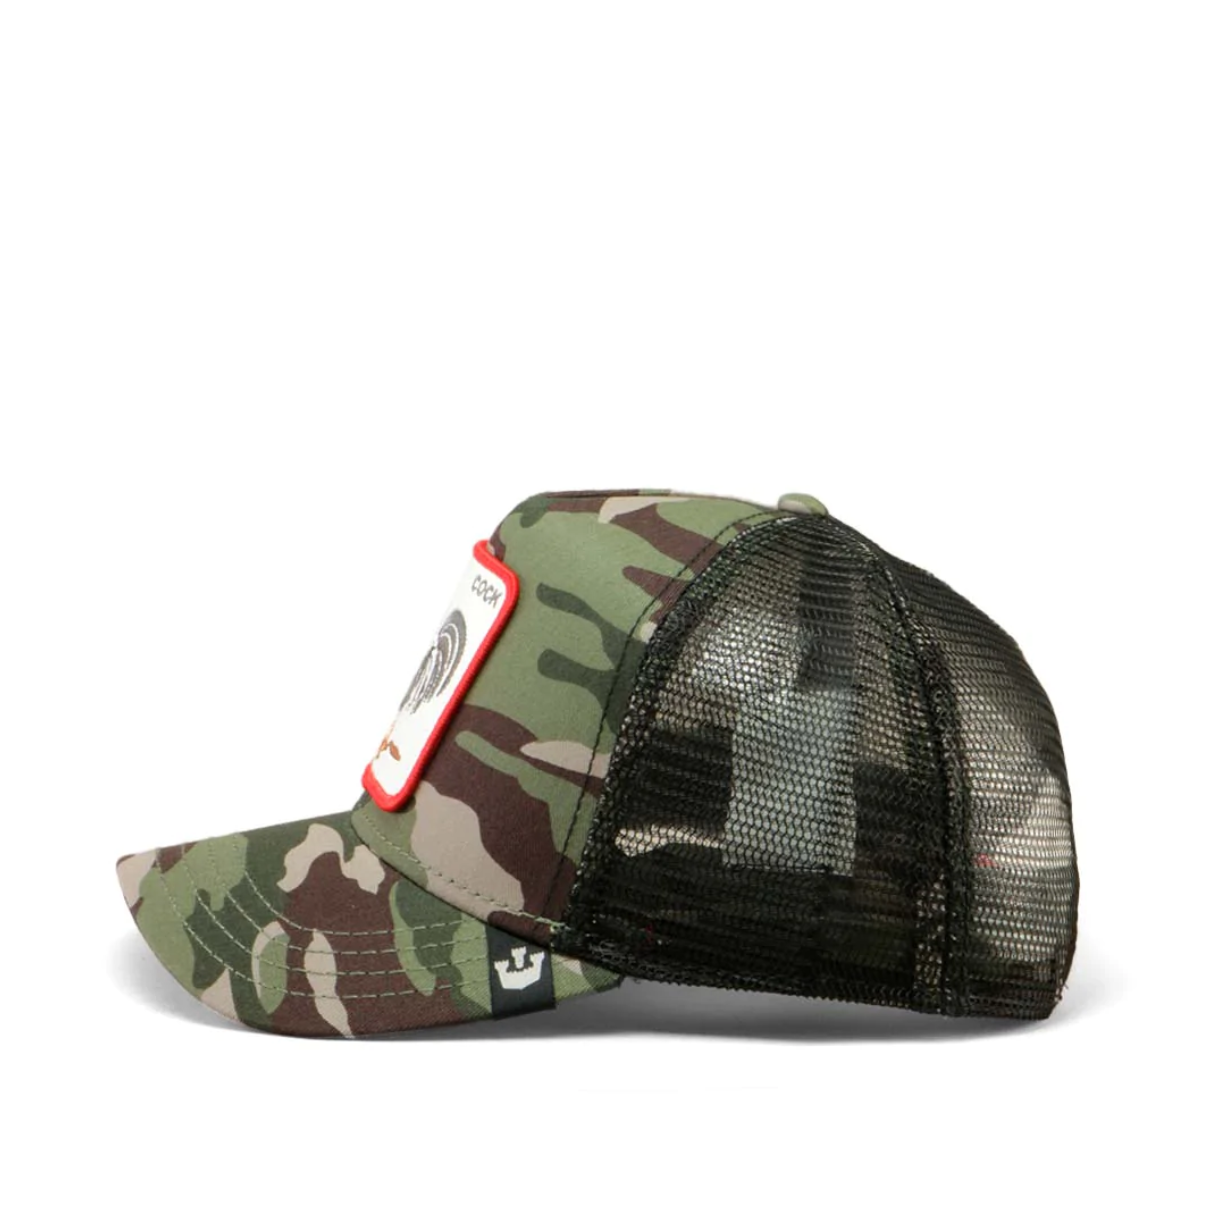 GORRA THE ROOSTER CAMO